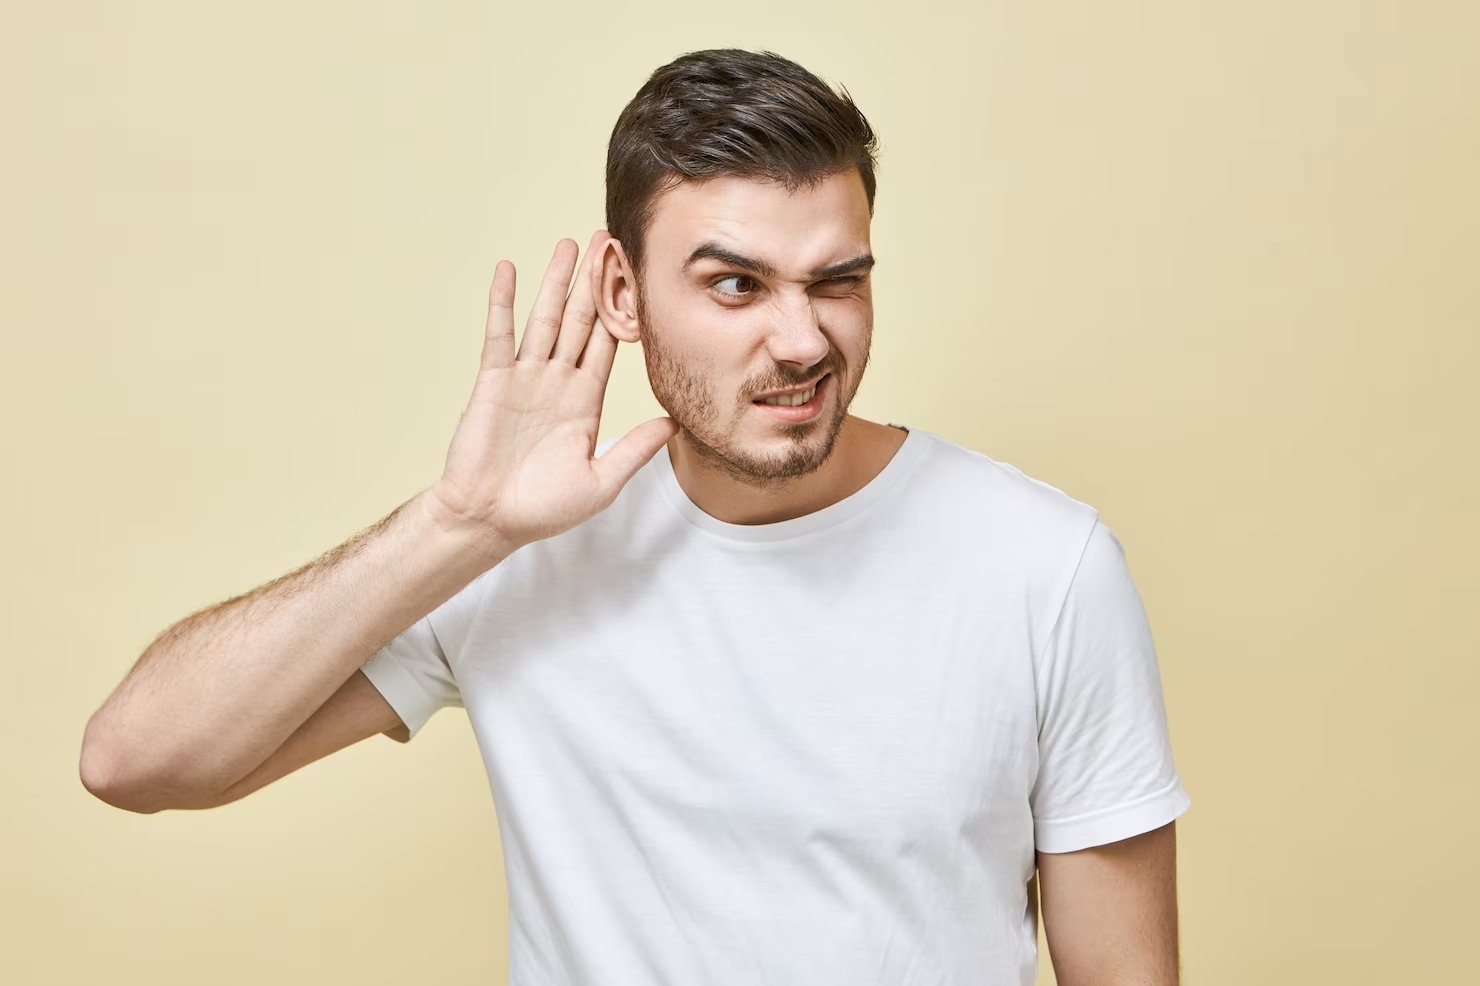 Can hearing aids make tinnitus worse? This article tries to clear up the confusion